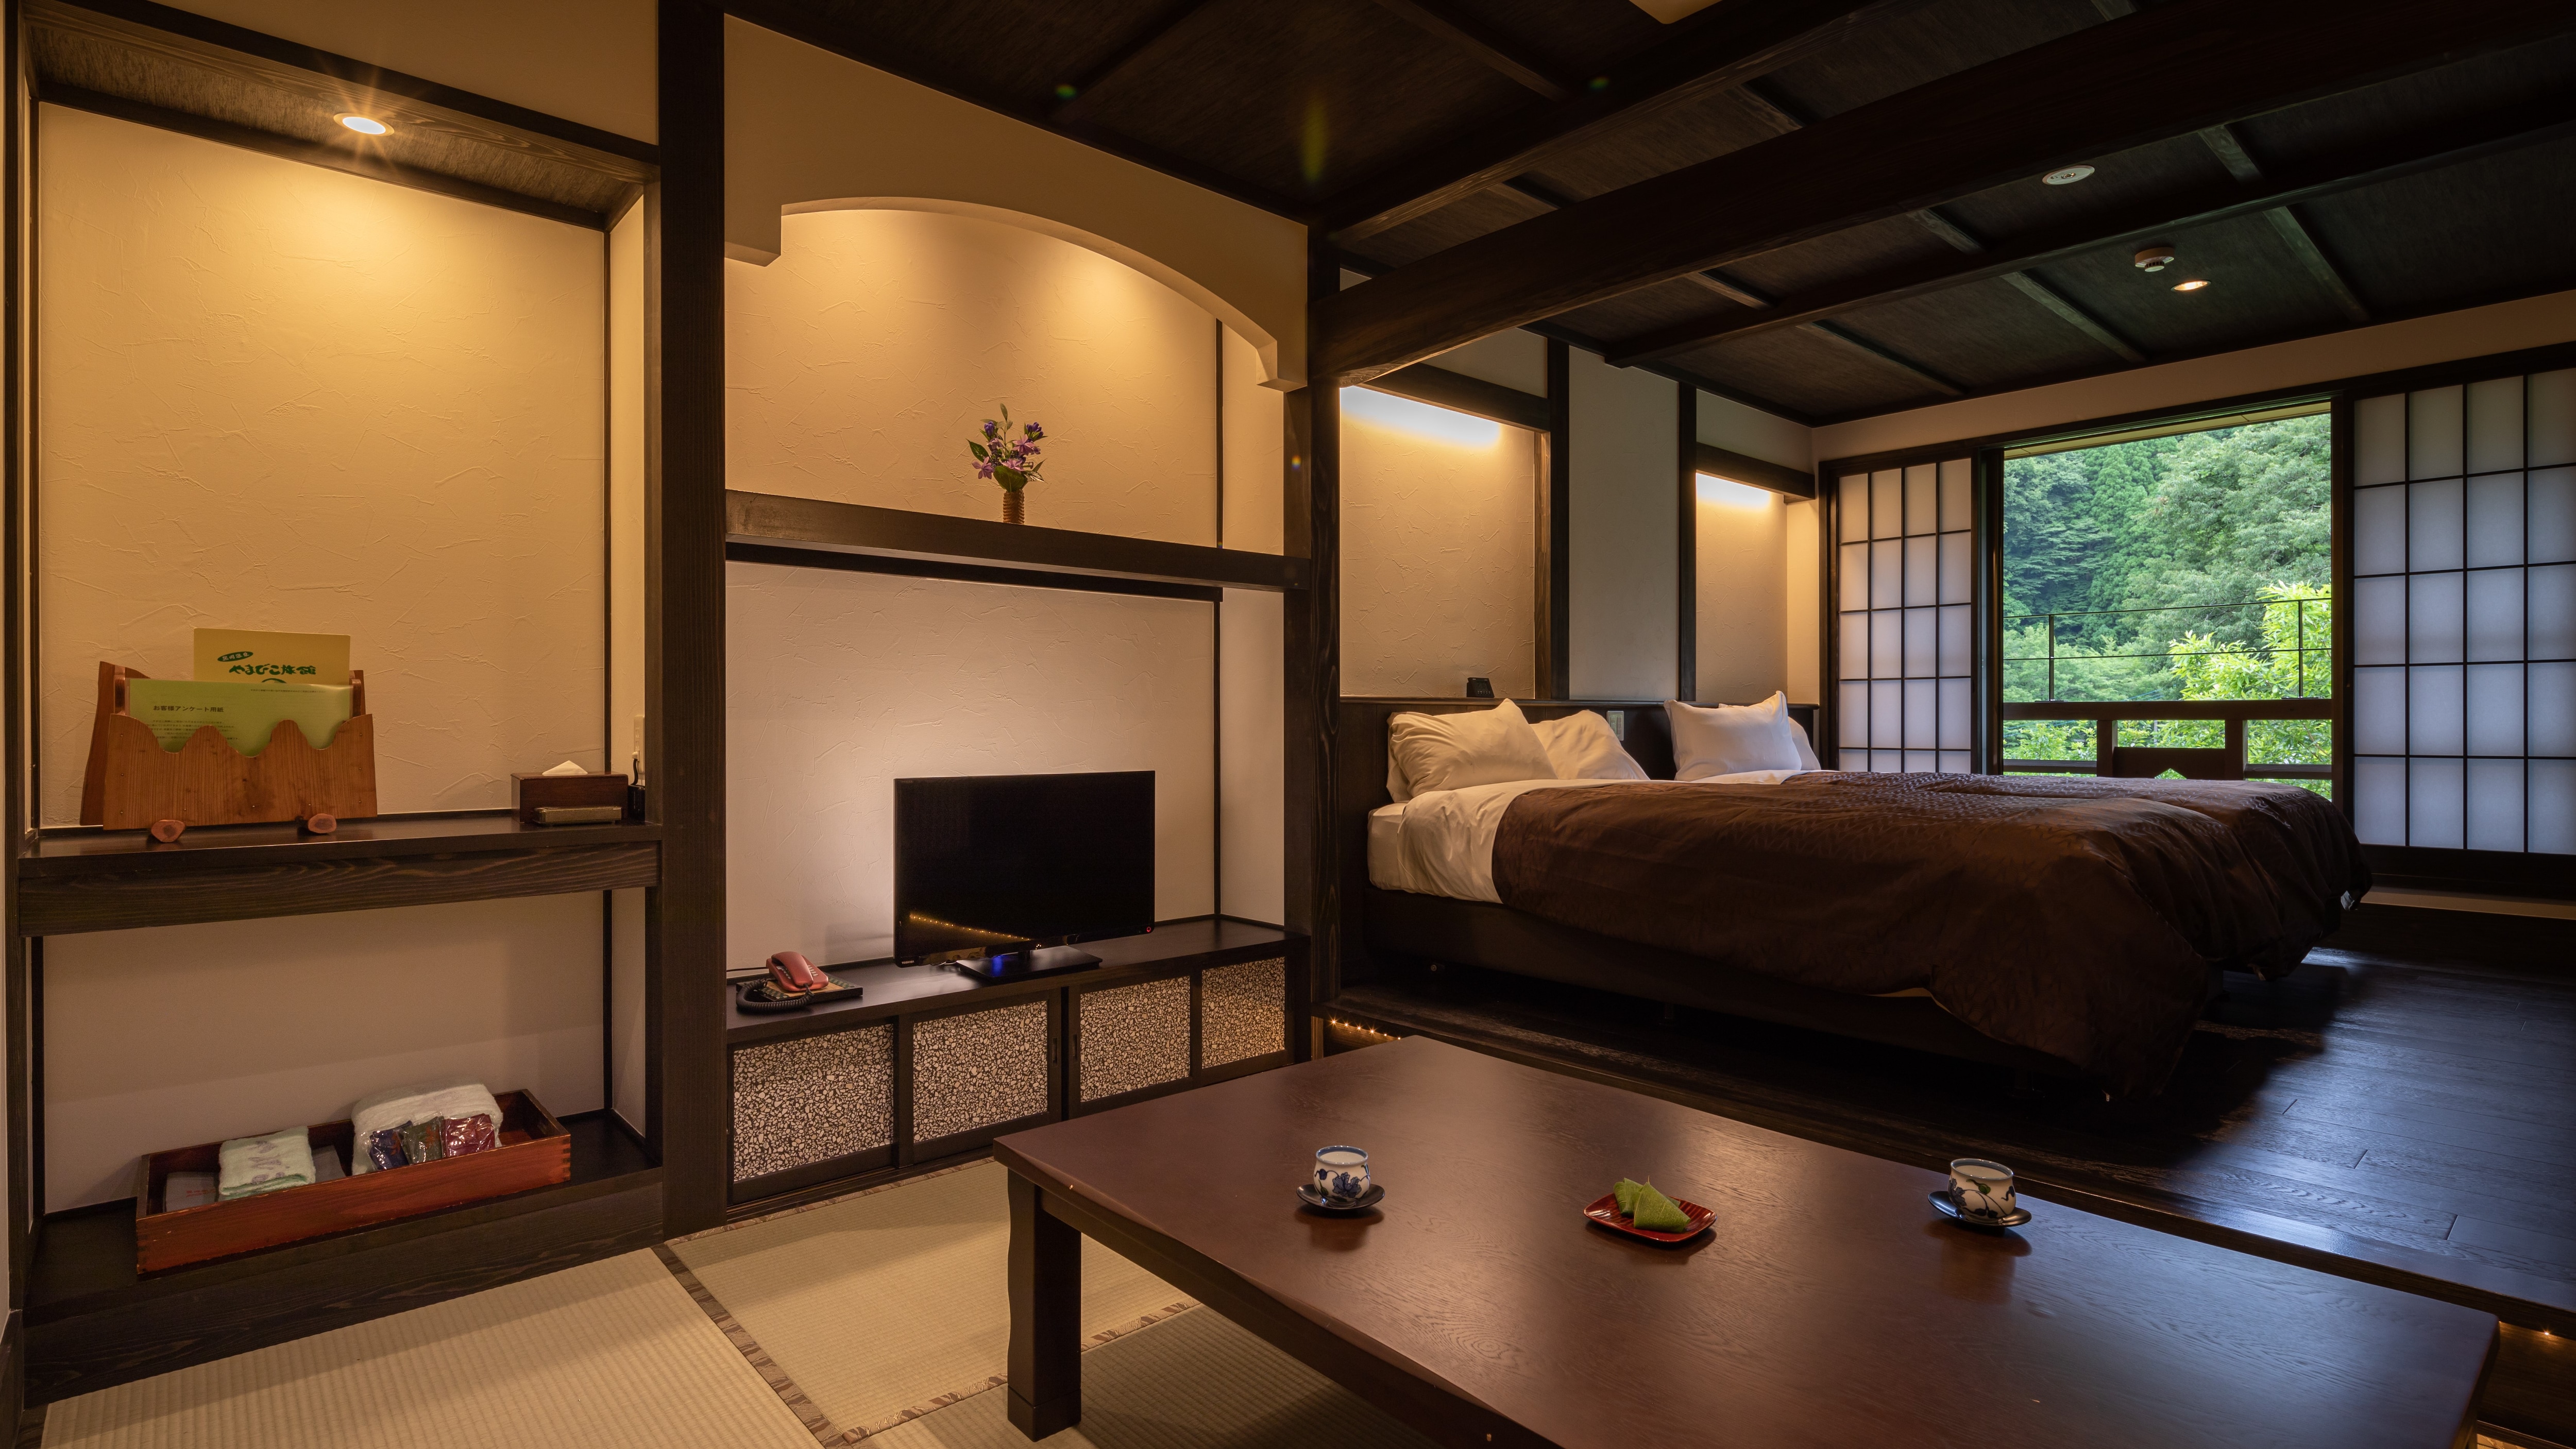 An example of Japanese and Western room II. This type has 3 rooms.